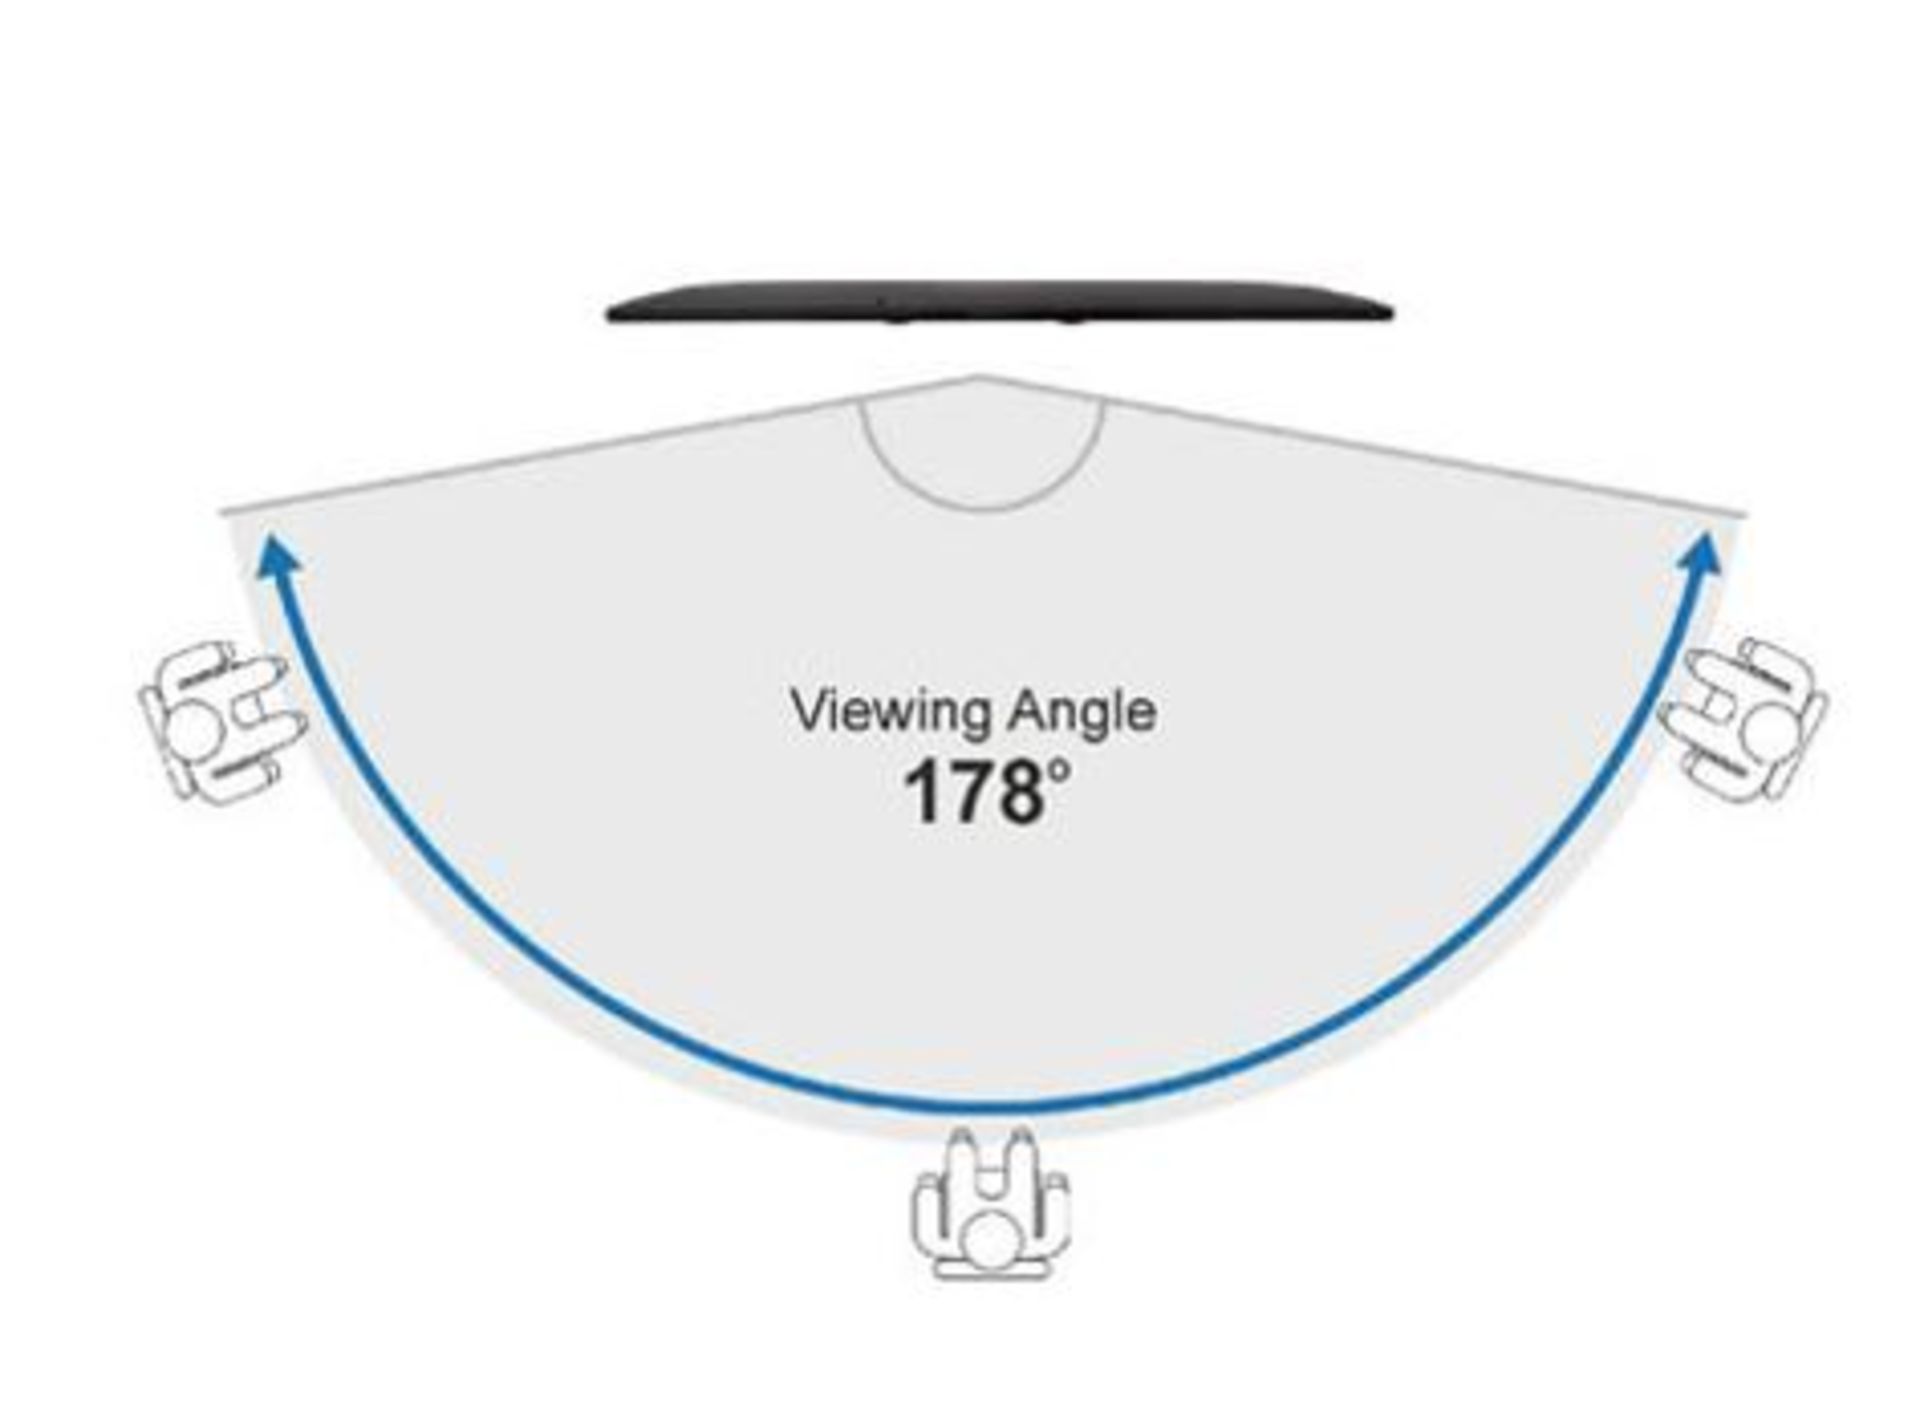 wide-viewing-angle-of-178-degrees